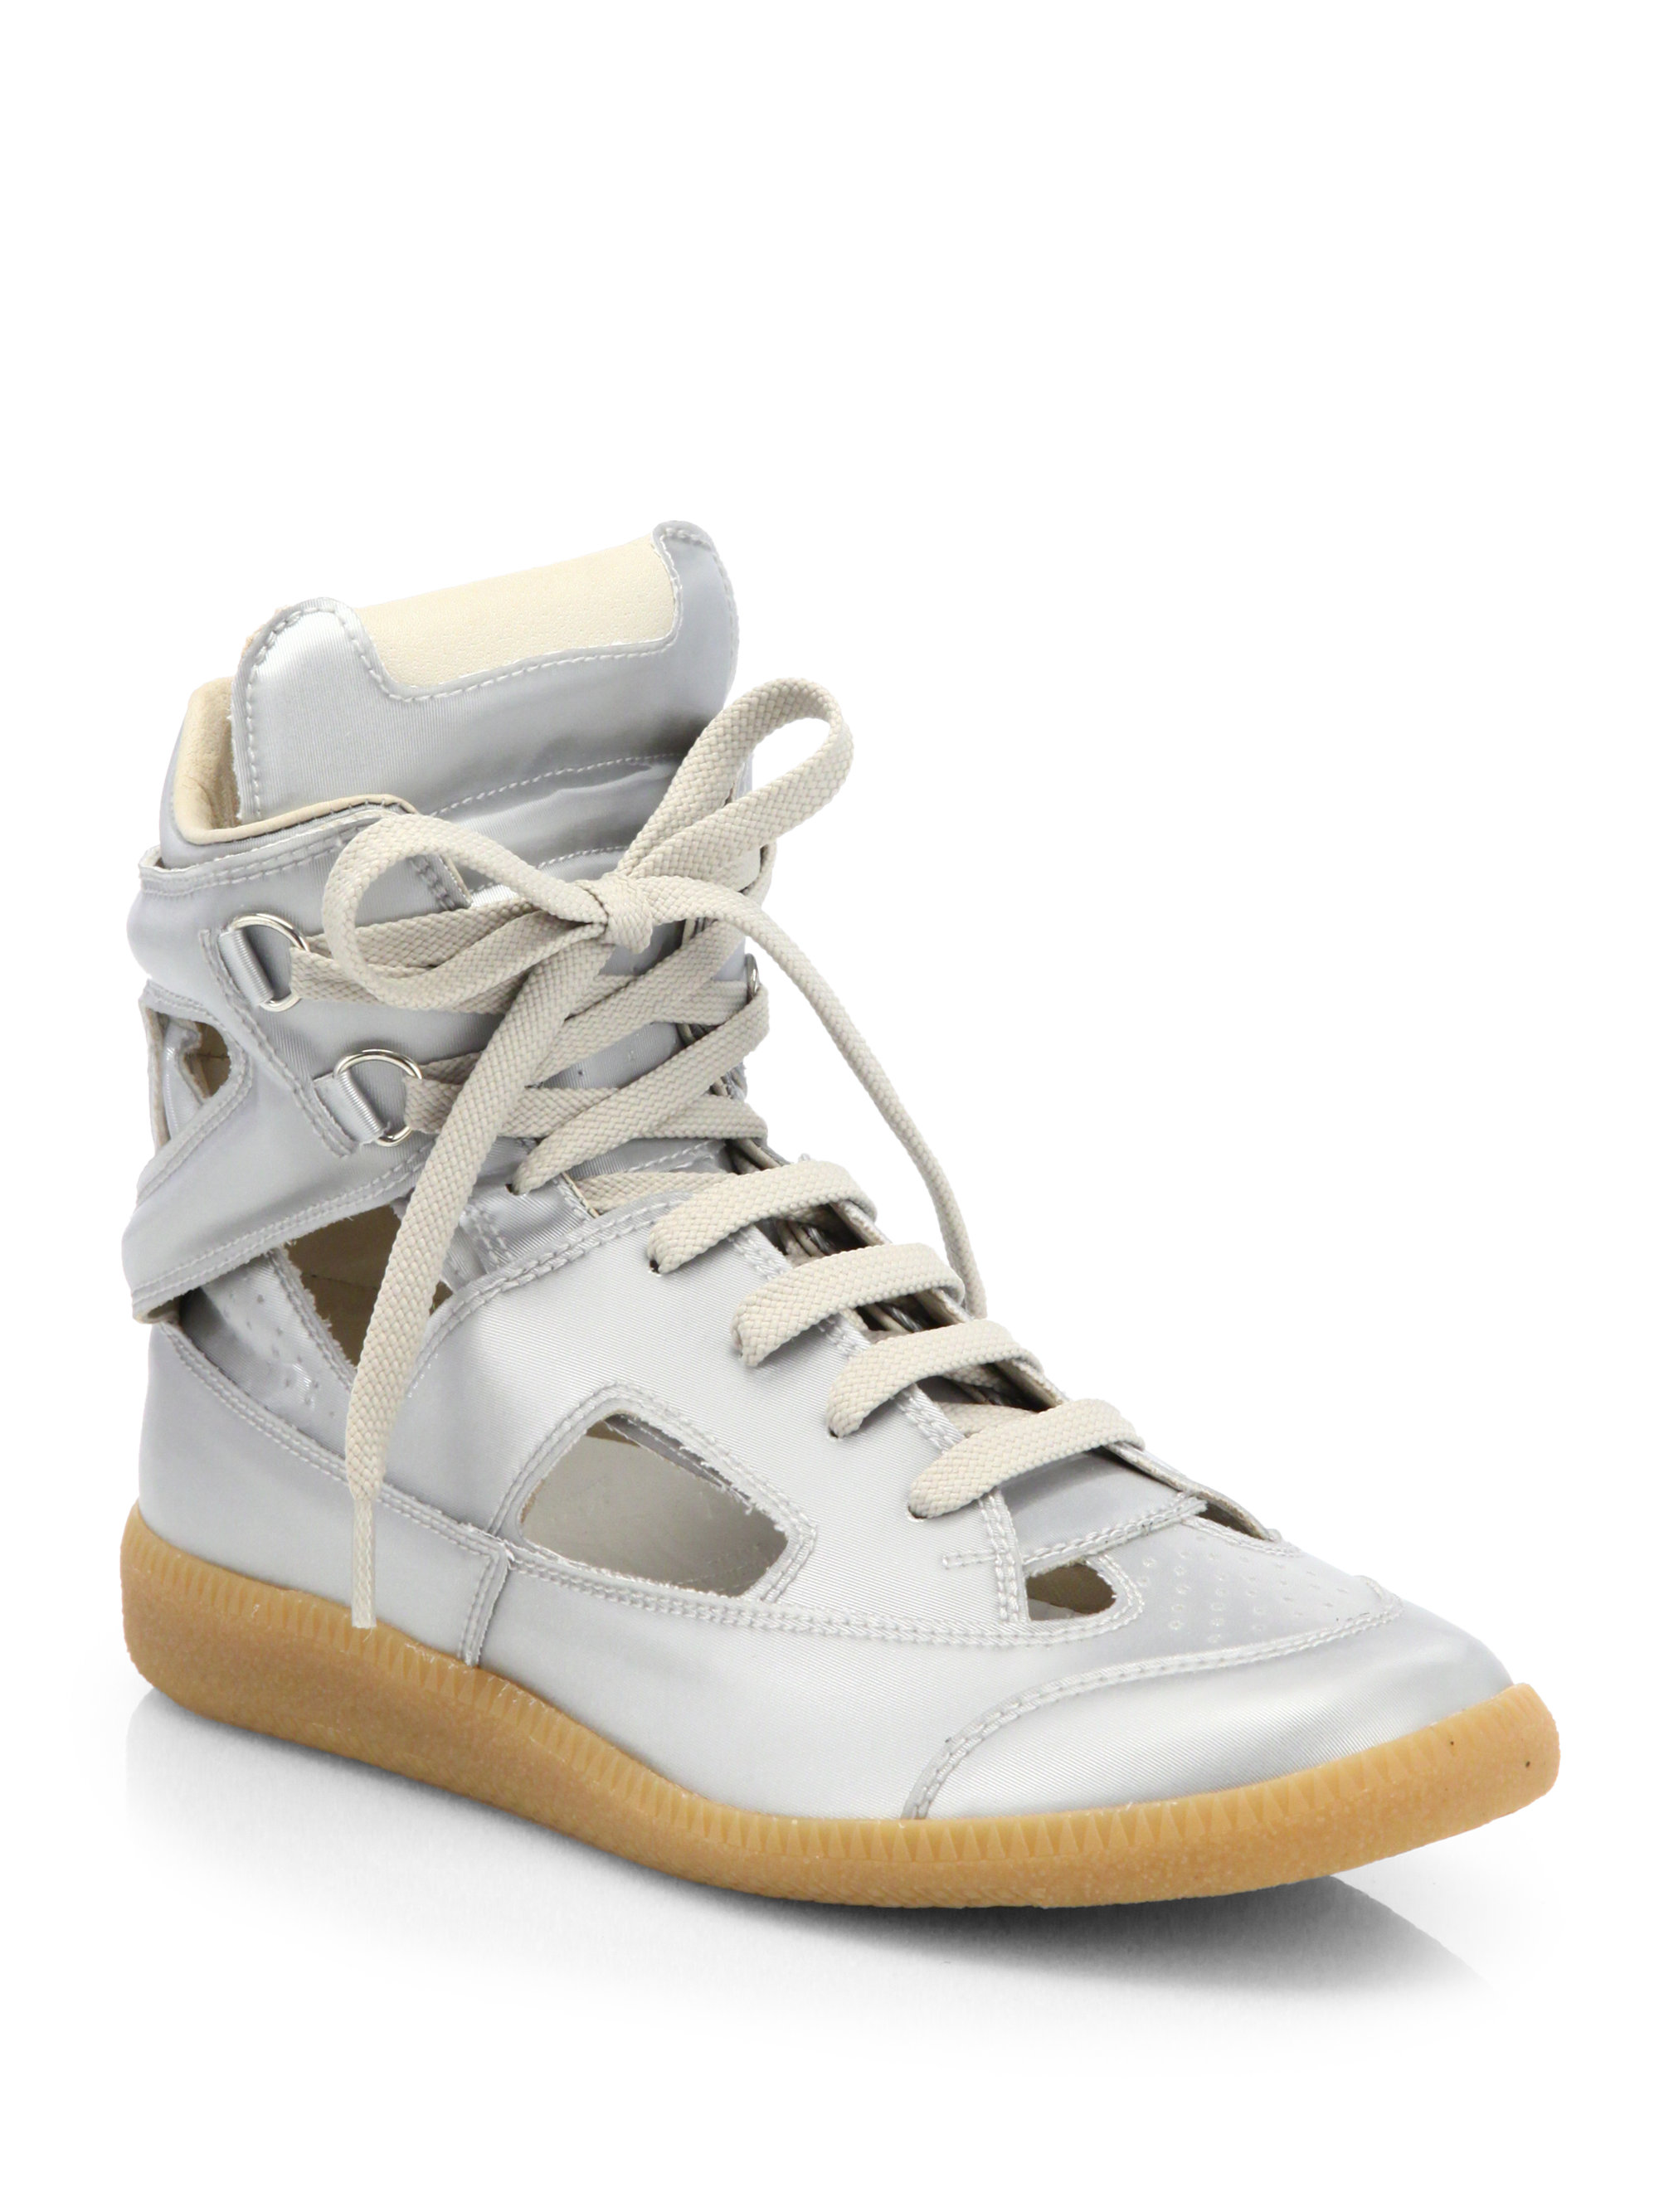 Maison Martin Margiela Metallic Canvas Cut-out Sneakers in Silver | Lyst